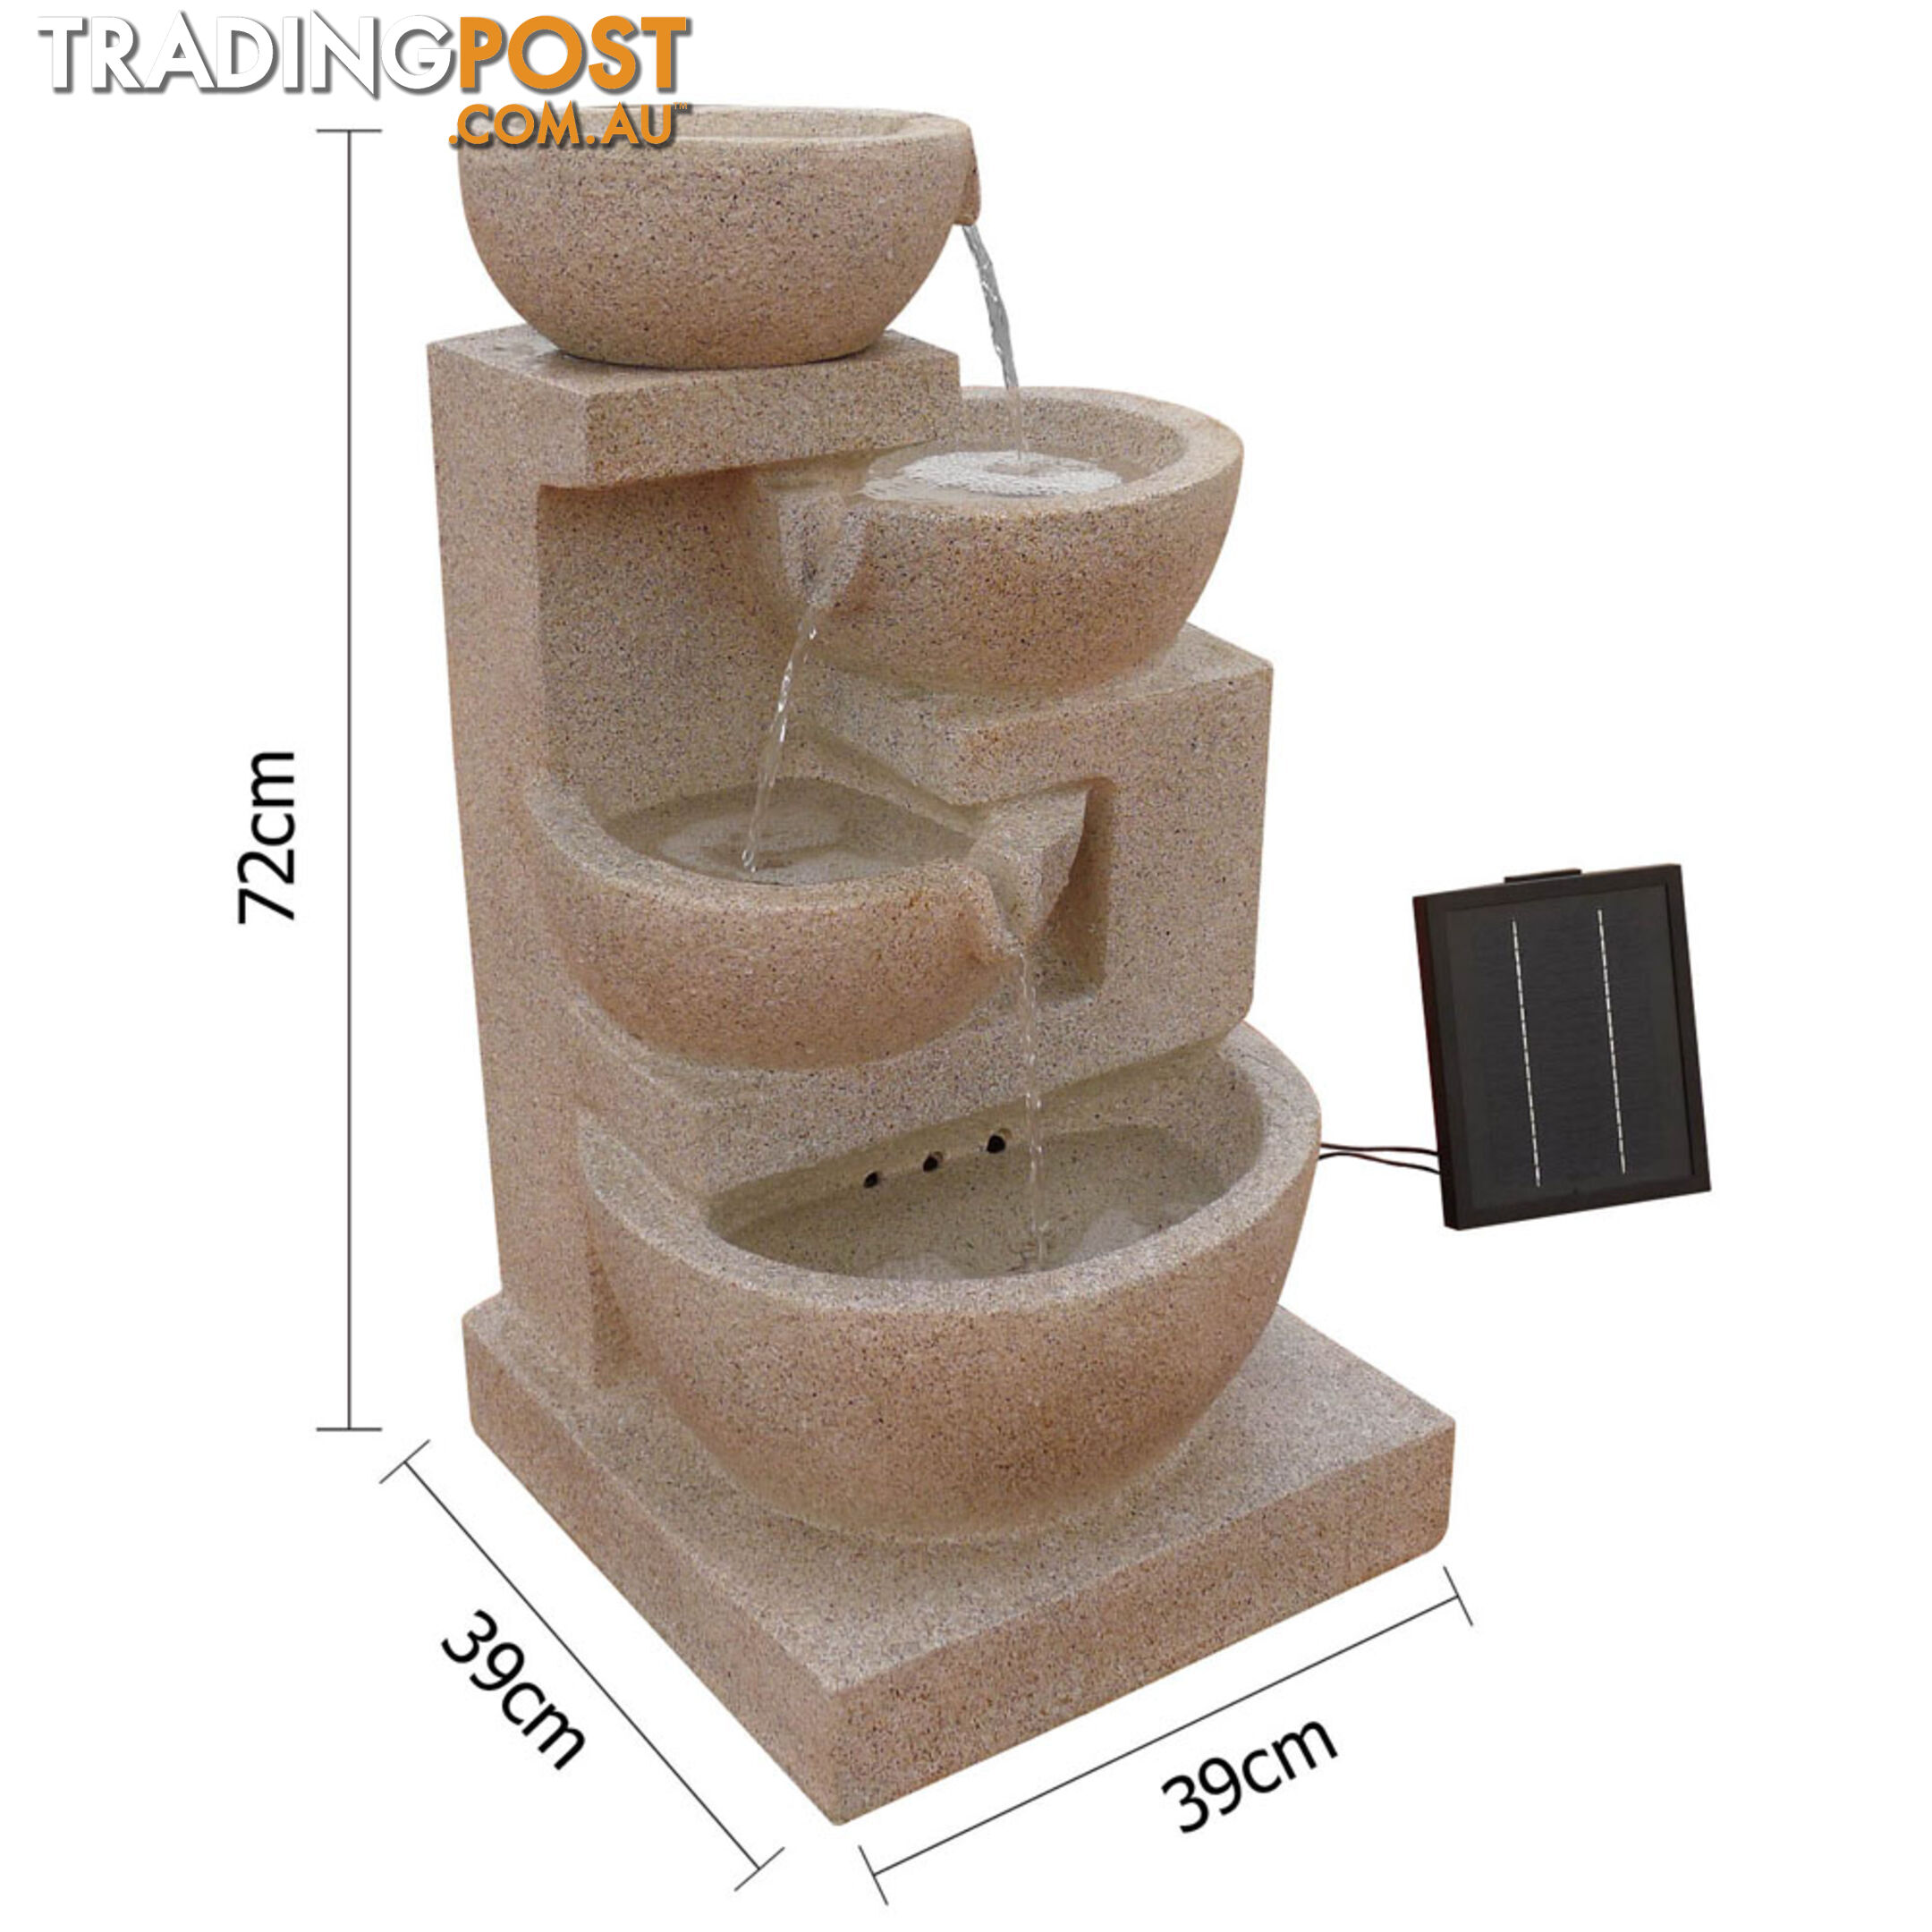 Solar Power Four-Tier Water Fountain Feature w/ LED Light Sand Beige